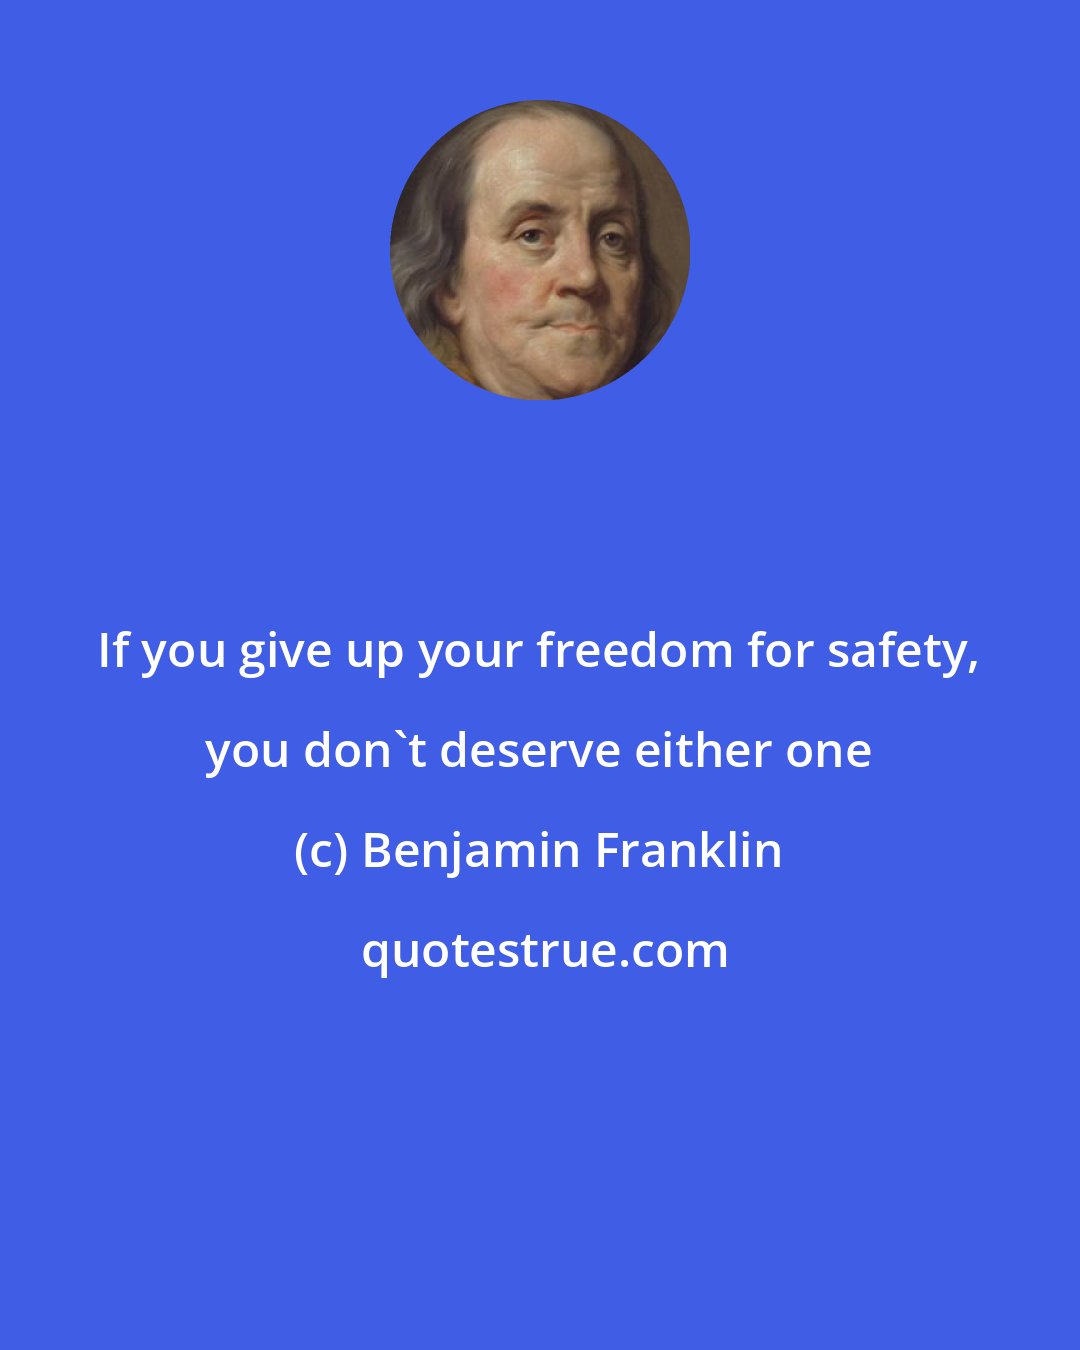 Benjamin Franklin: If you give up your freedom for safety, you don't deserve either one